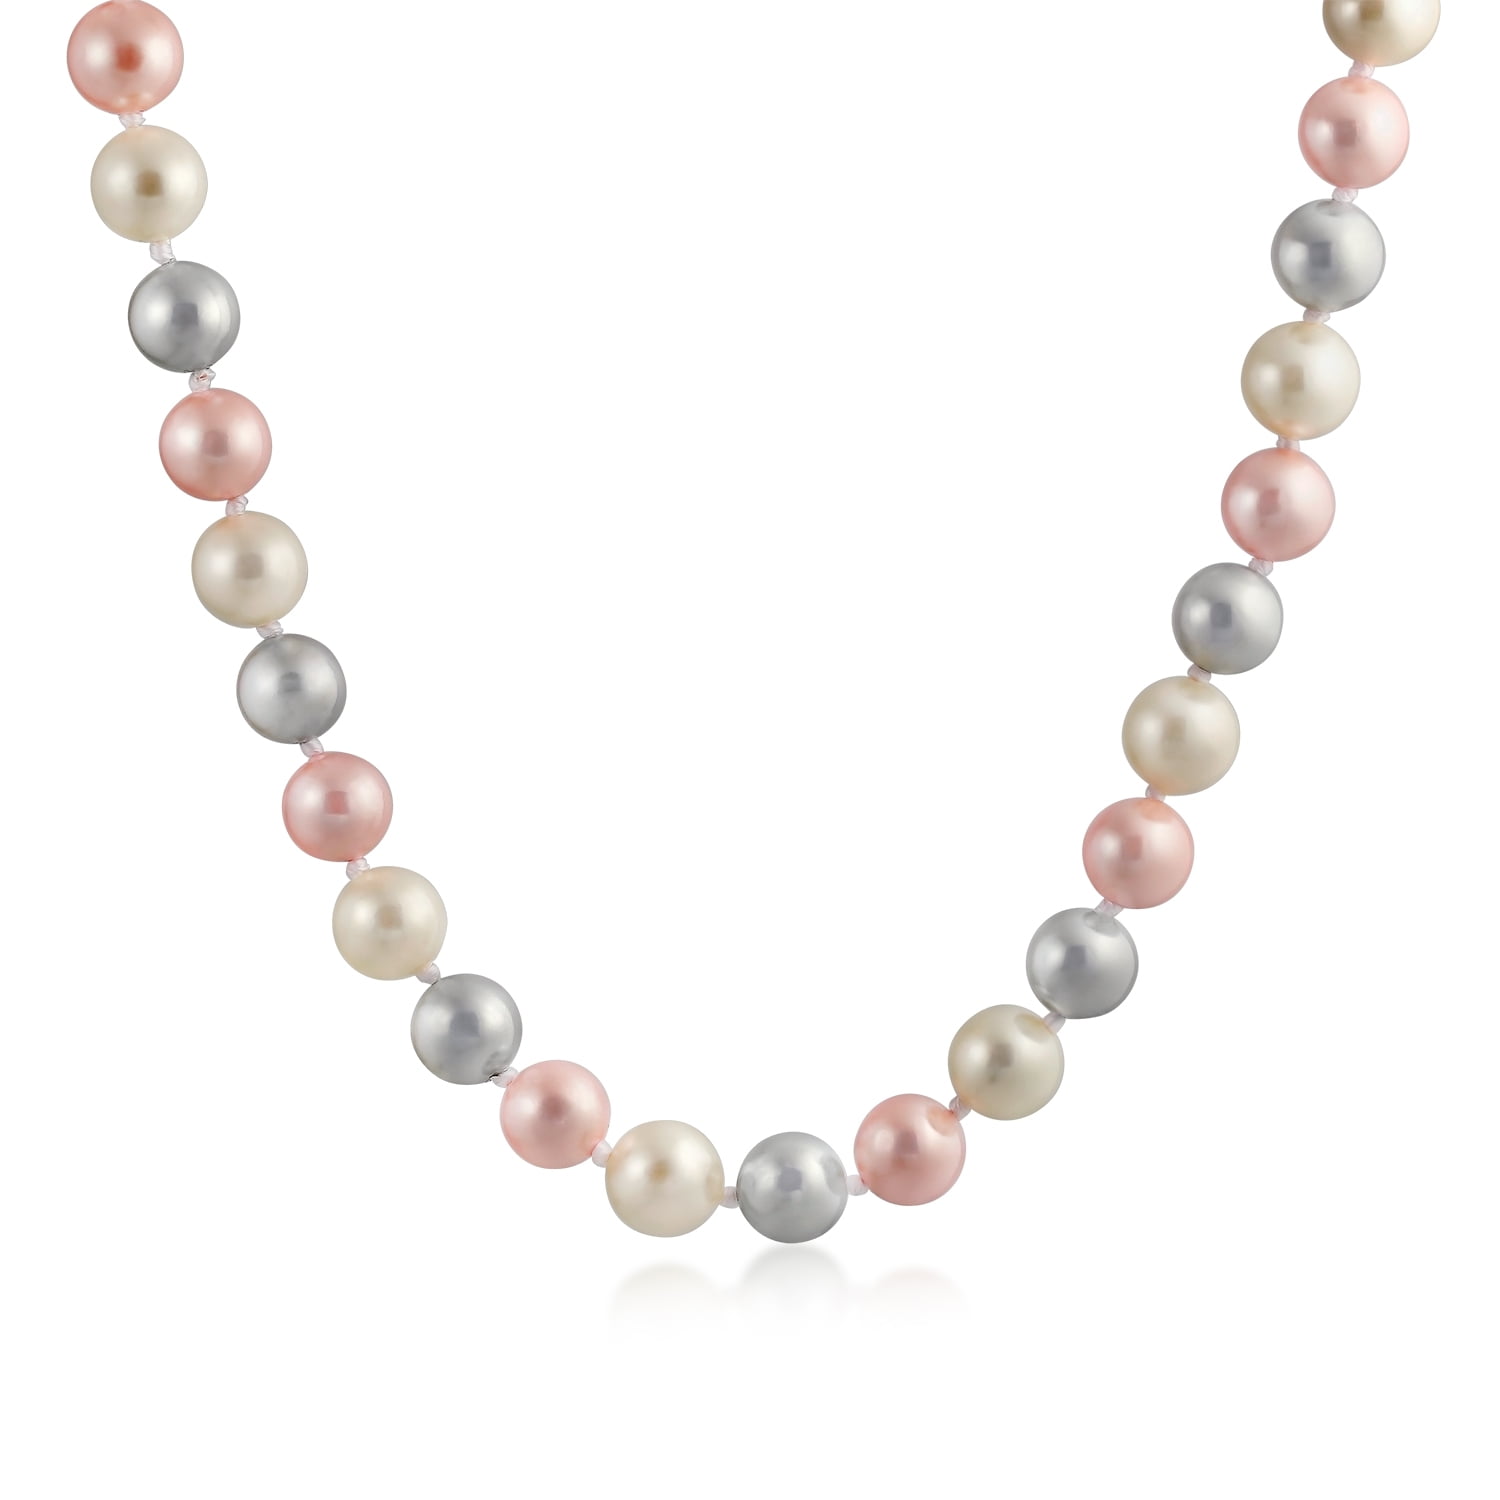 Statement 3 Strand Twisted Orange Coral and Cream Freshwater Pearl Necklace